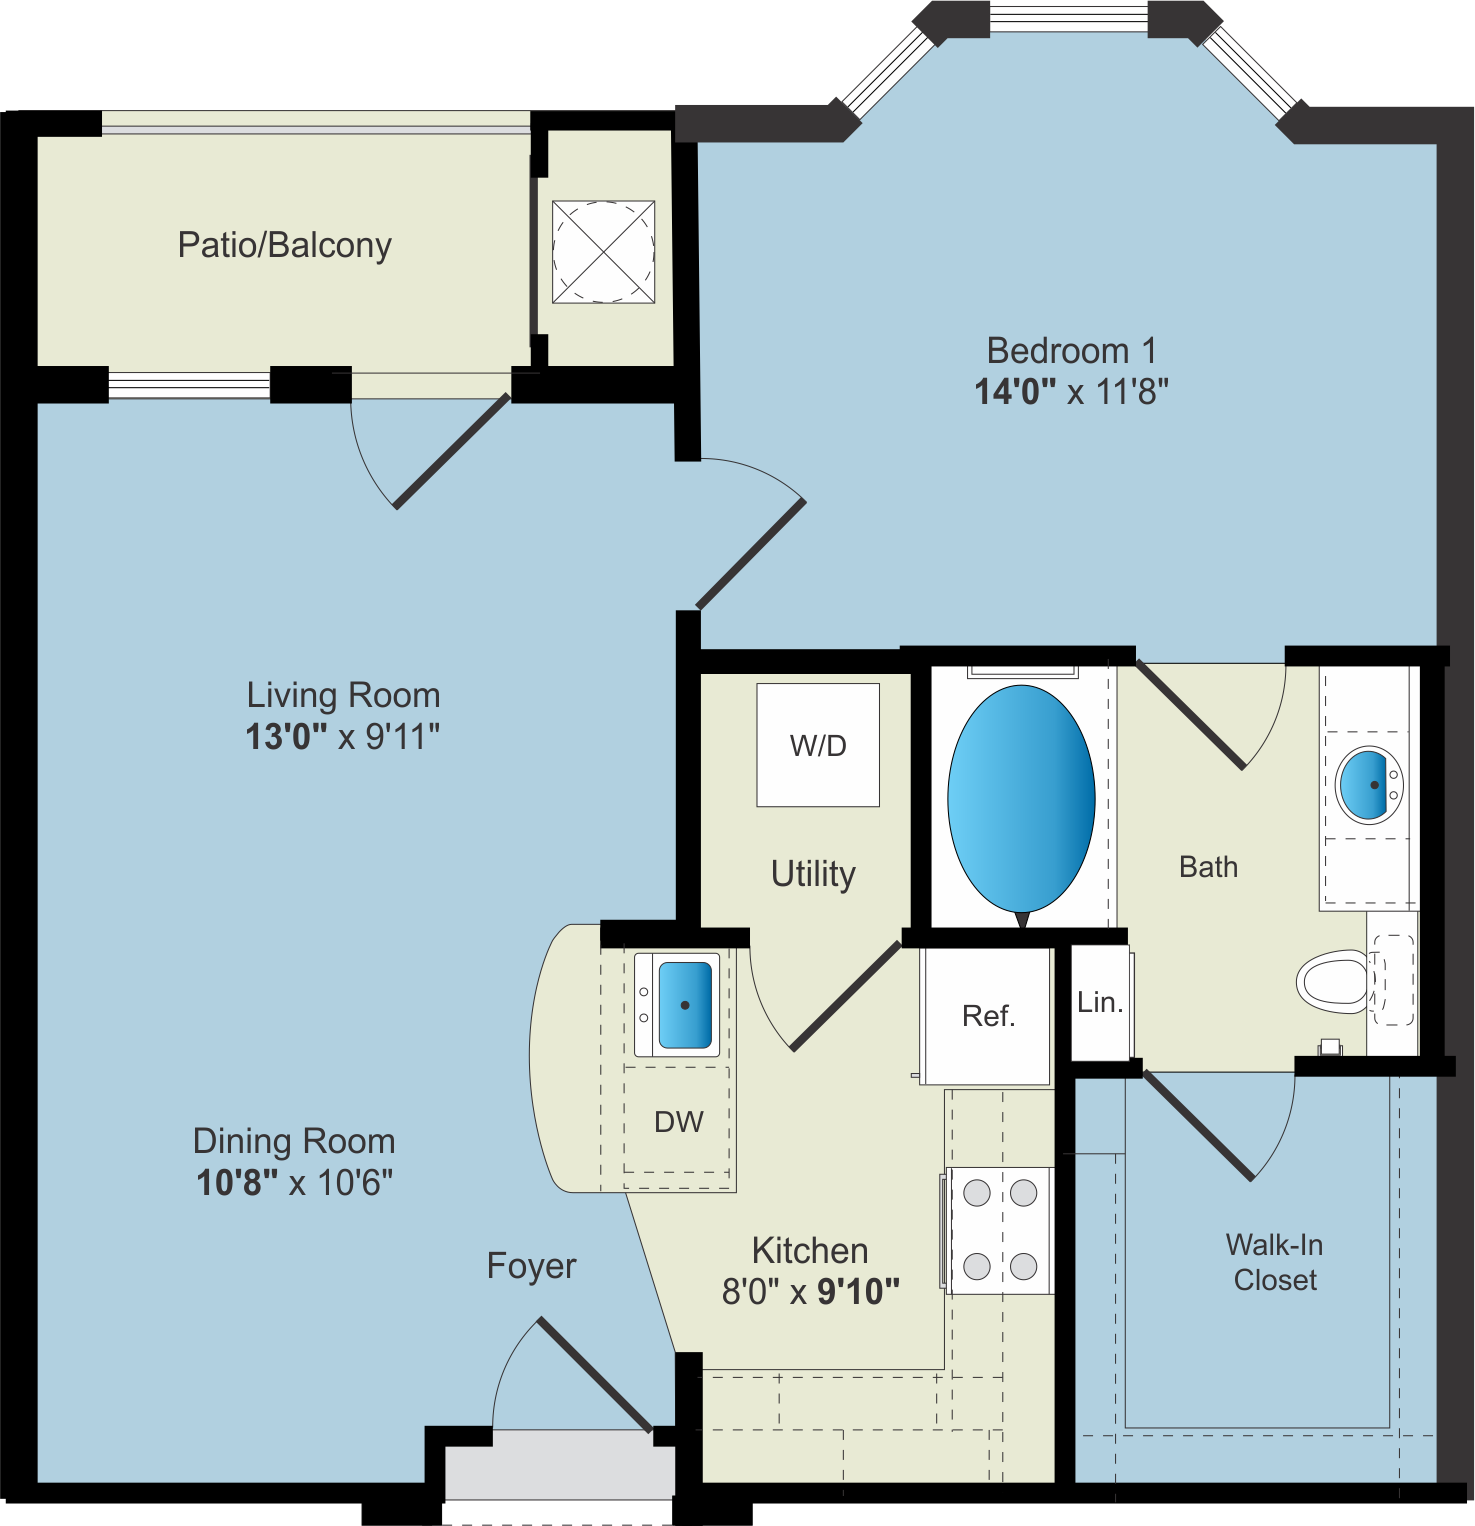 An exquisite floor plan showcasing a luxurious one-bedroom apartment designed for Apartment Rentals.